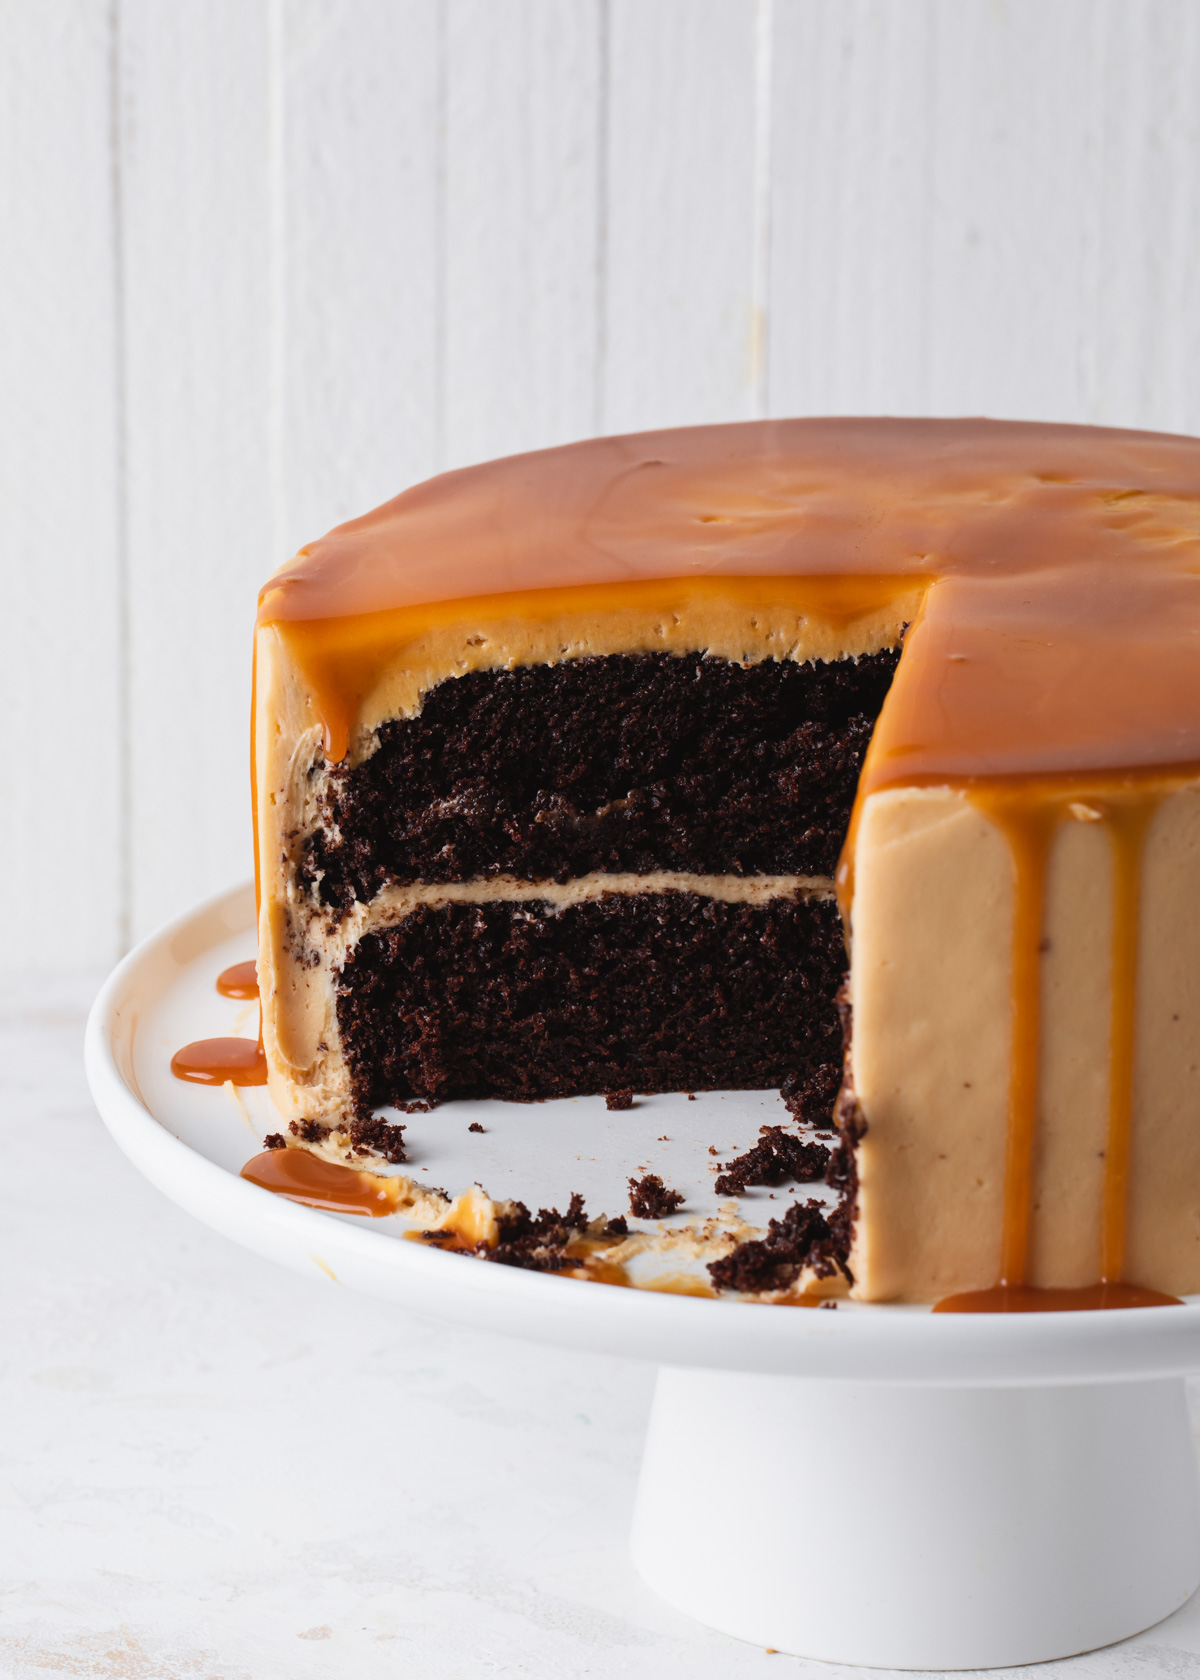 A close up of a chocolate caramel cake that's been sliced